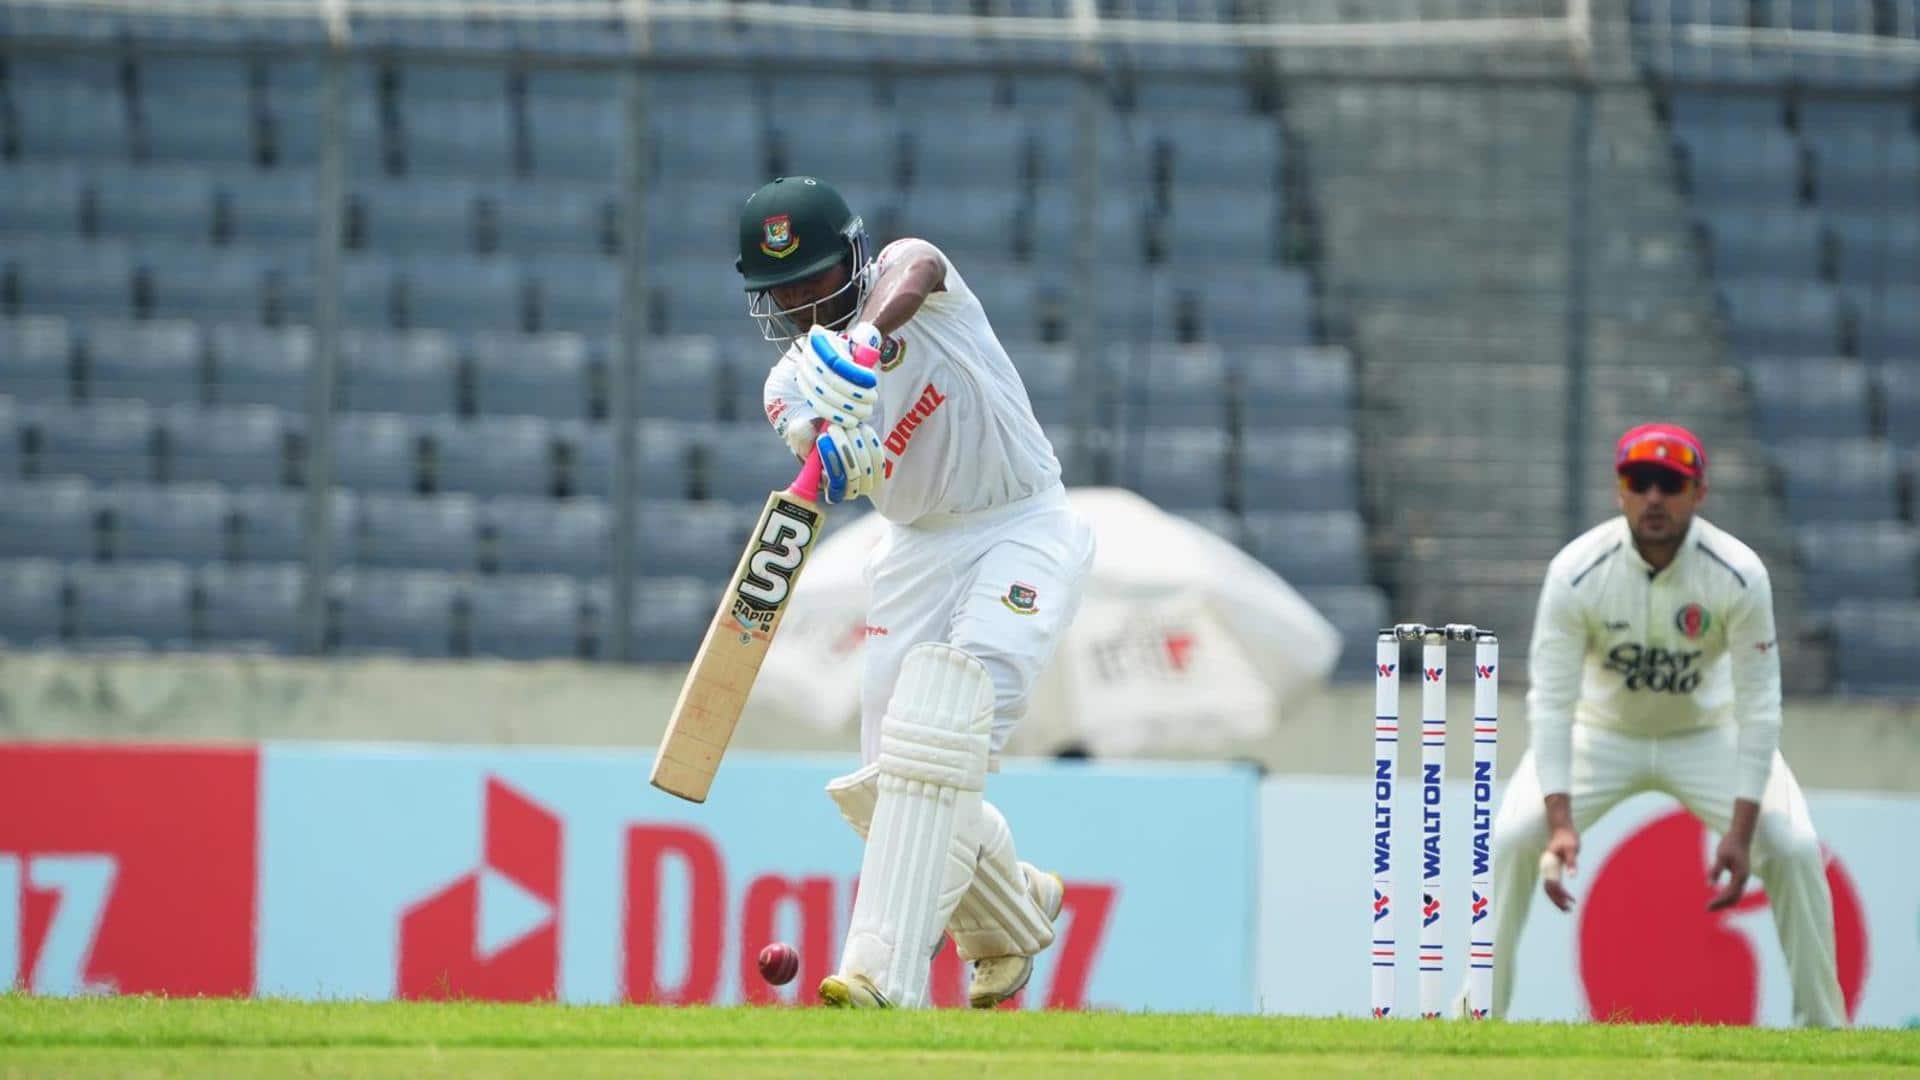 Only Test, Mahmudul Hasan Joy smashes 76 versus Afghanistan: Stats